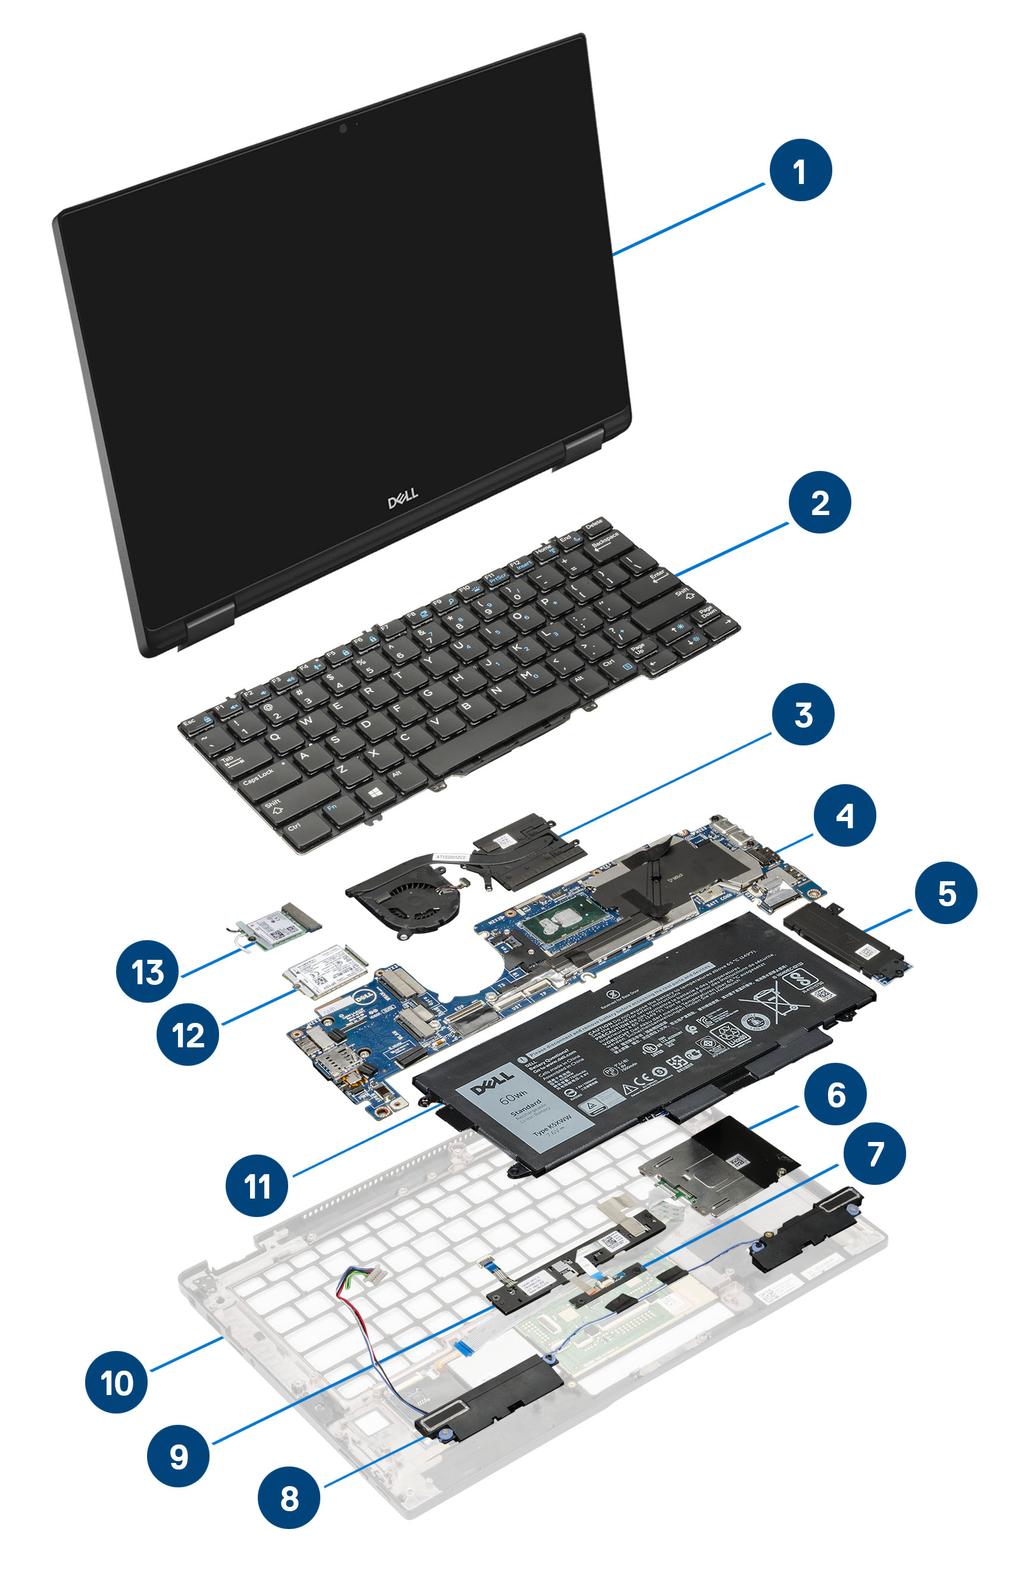 Major components of your system 1. Display assembly 2.